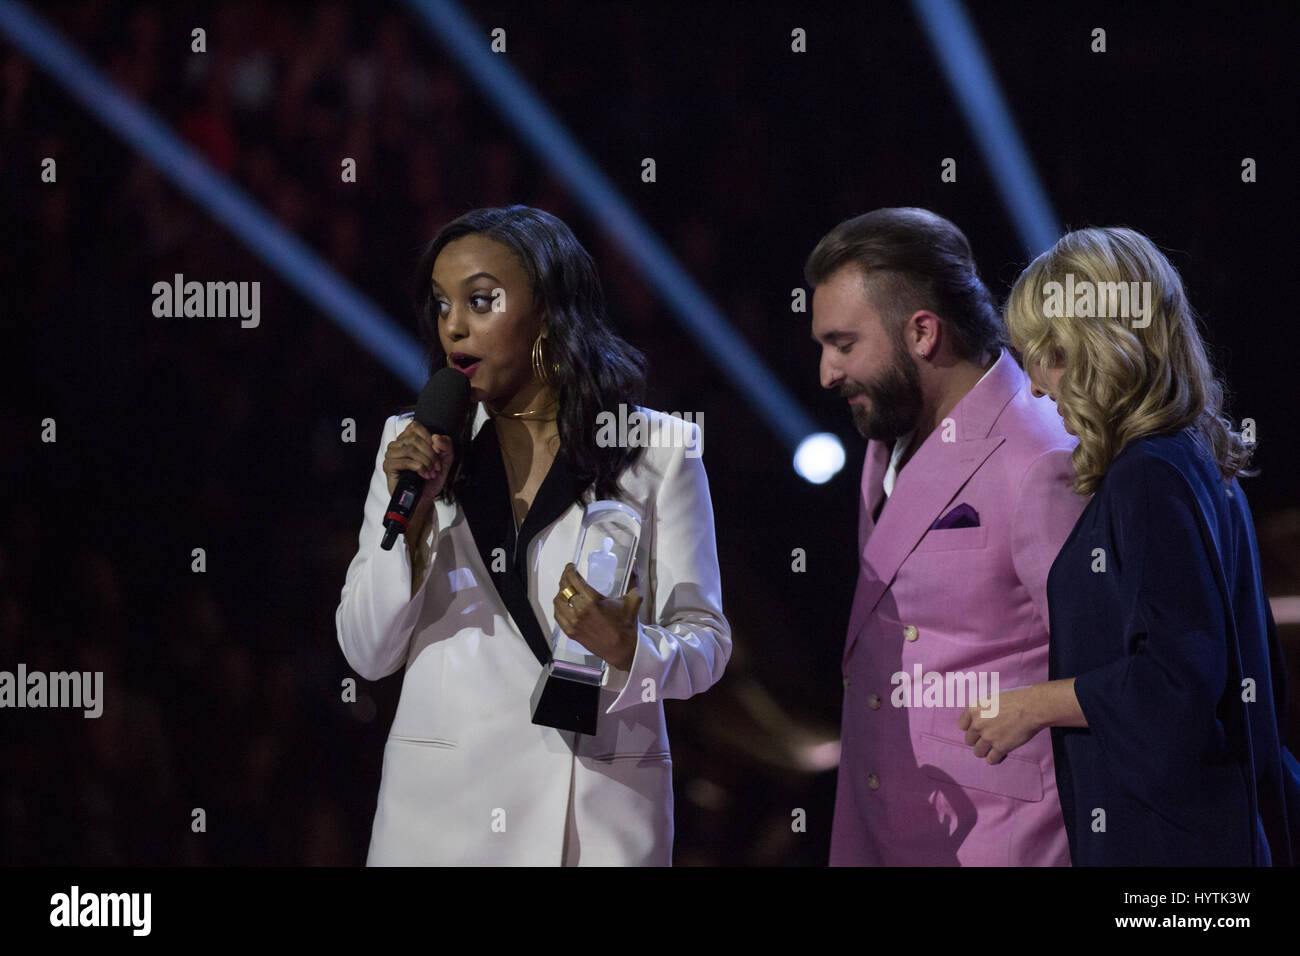 Ruth B accepts the Breakthrough Artist of the Year Award at the 2017 Juno Awards. Stock Photo